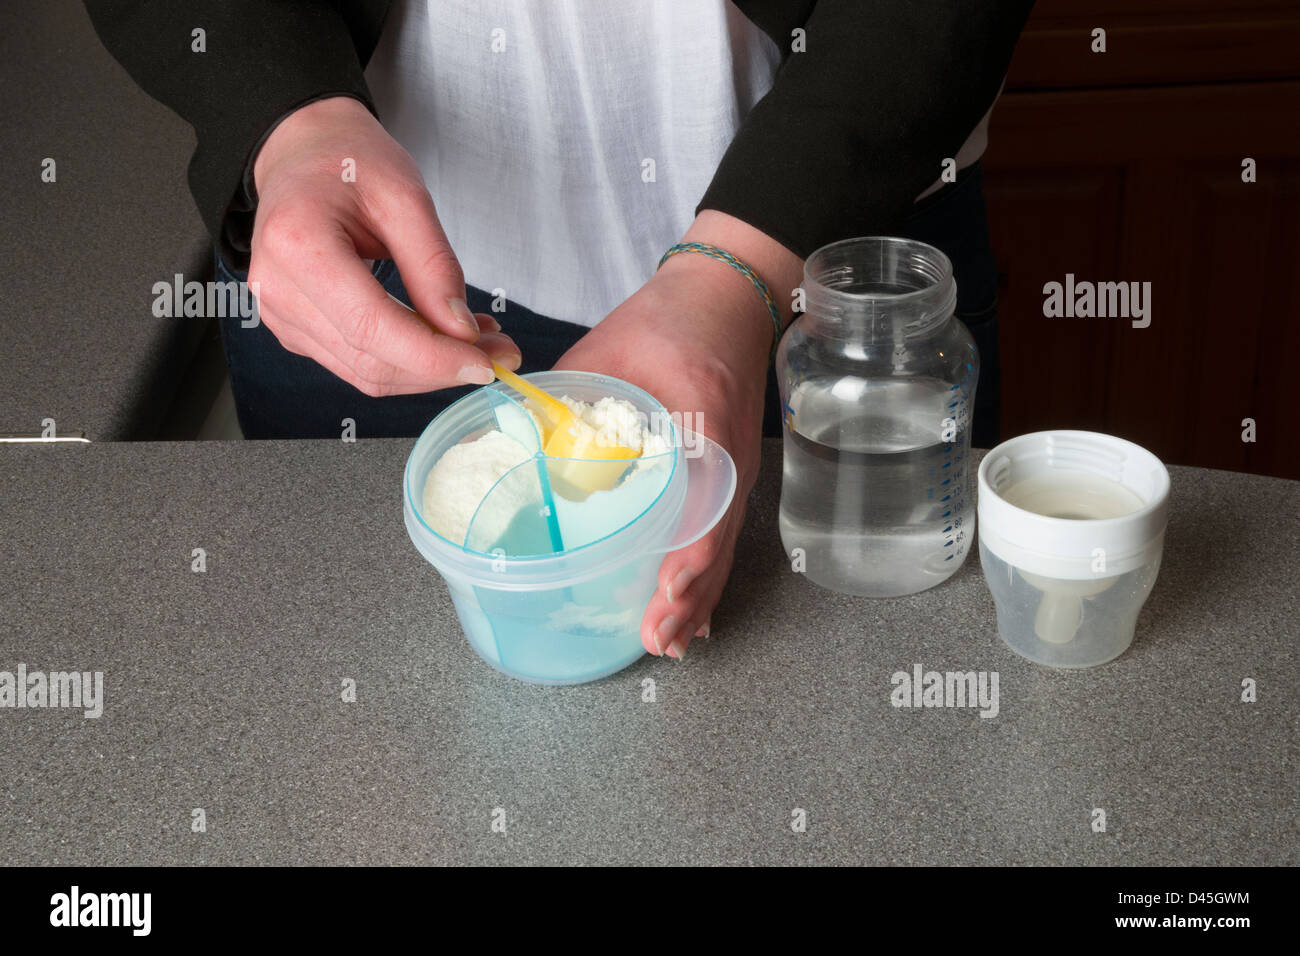 Young mother's hands preparing powdered milk drink for her baby Stock Photo